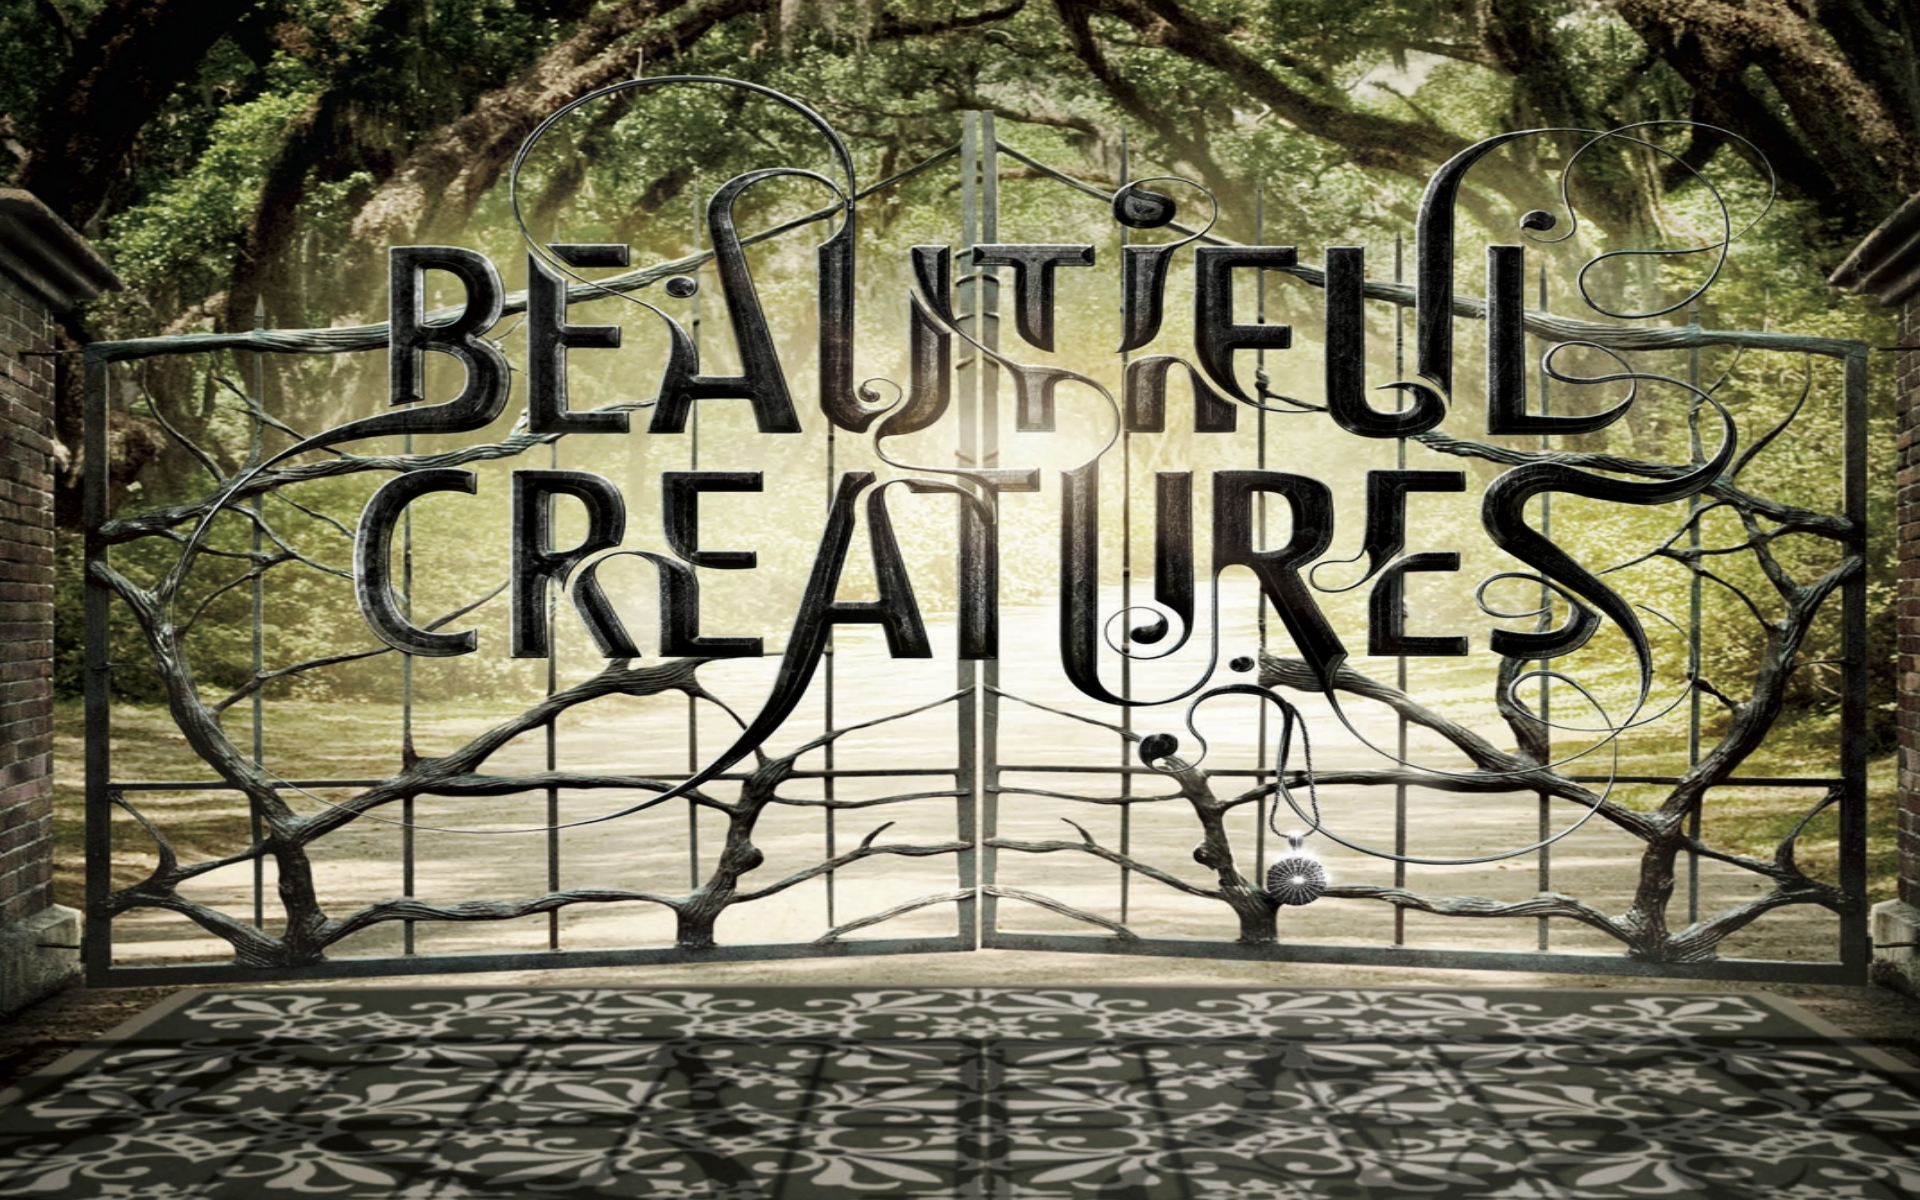 Beautiful Creatures Movie HD Wallpaper And Character Posters